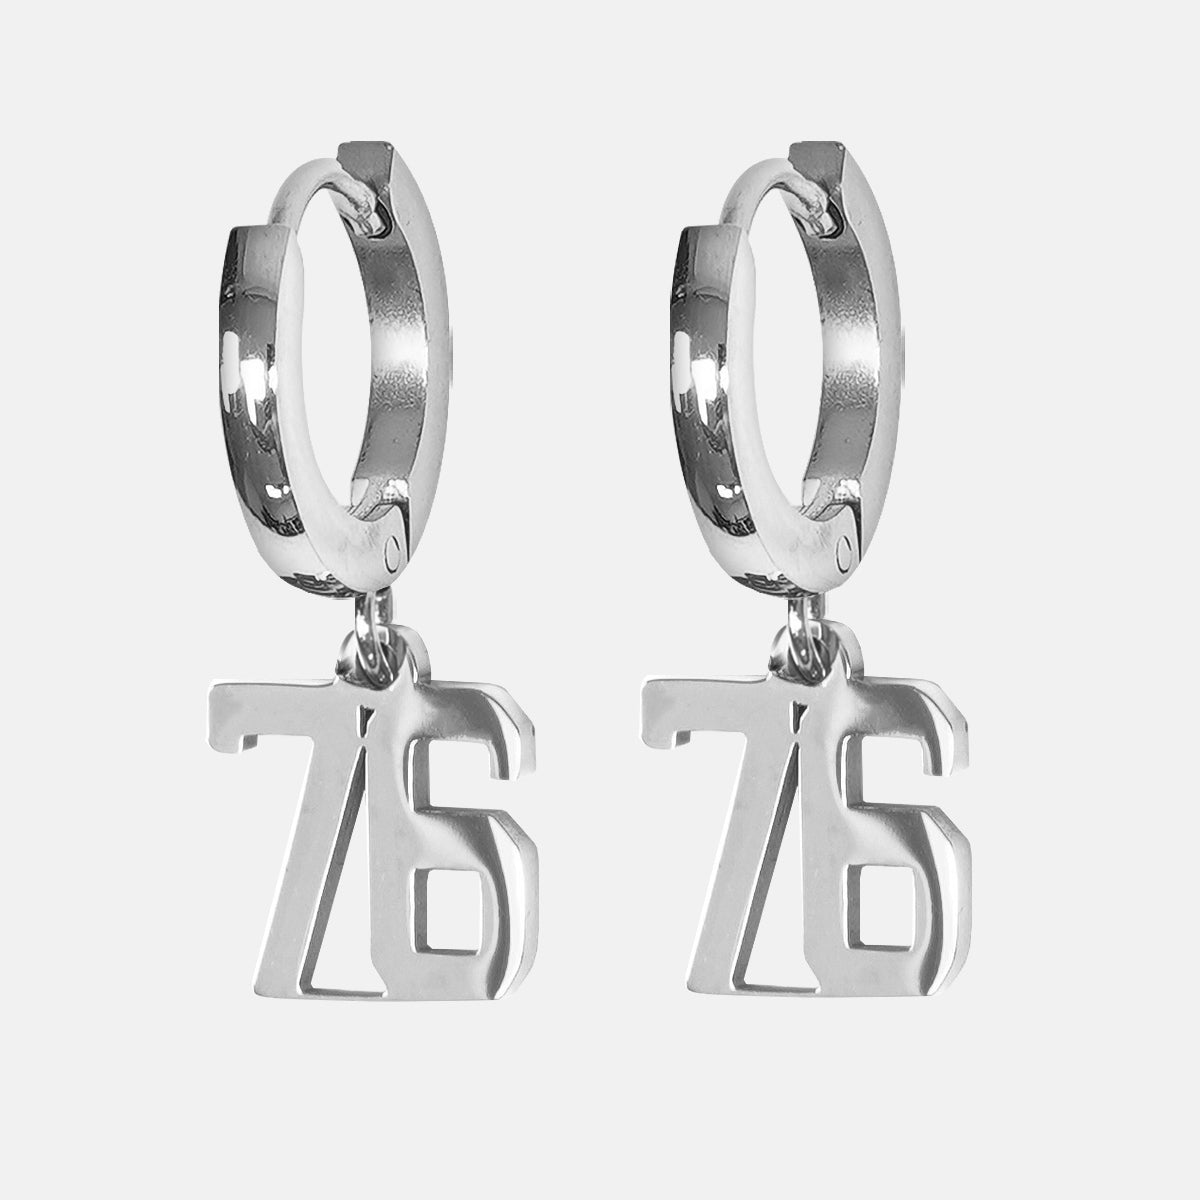 76 Number Earring - Stainless Steel